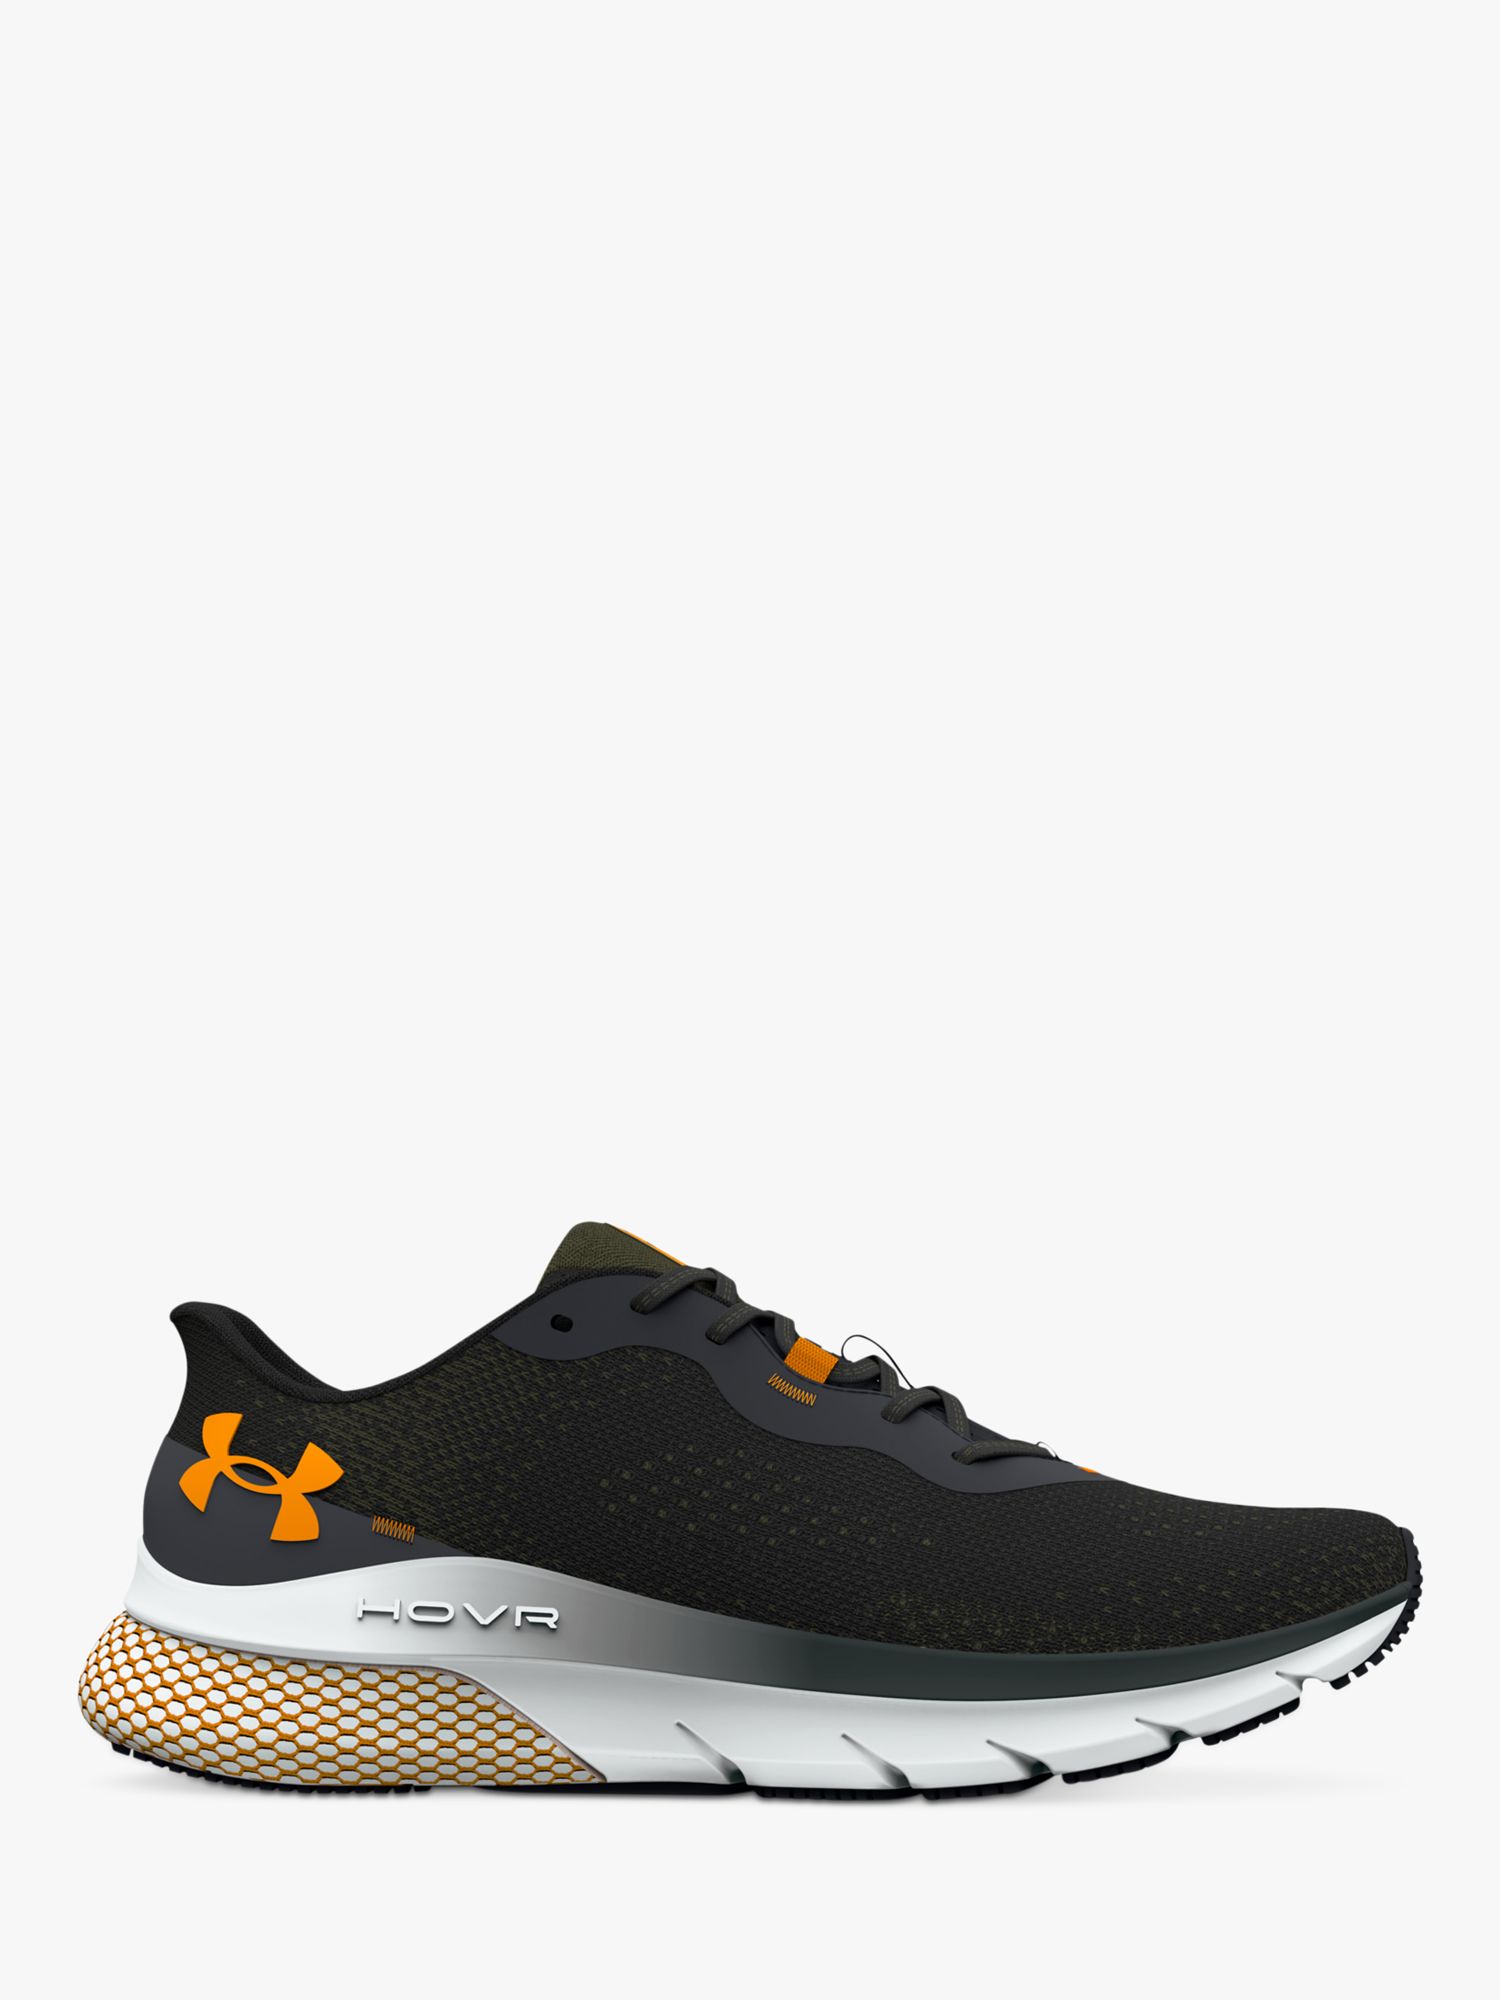 Under Armour HOVR Turbulence Printed Men's Running Shoes